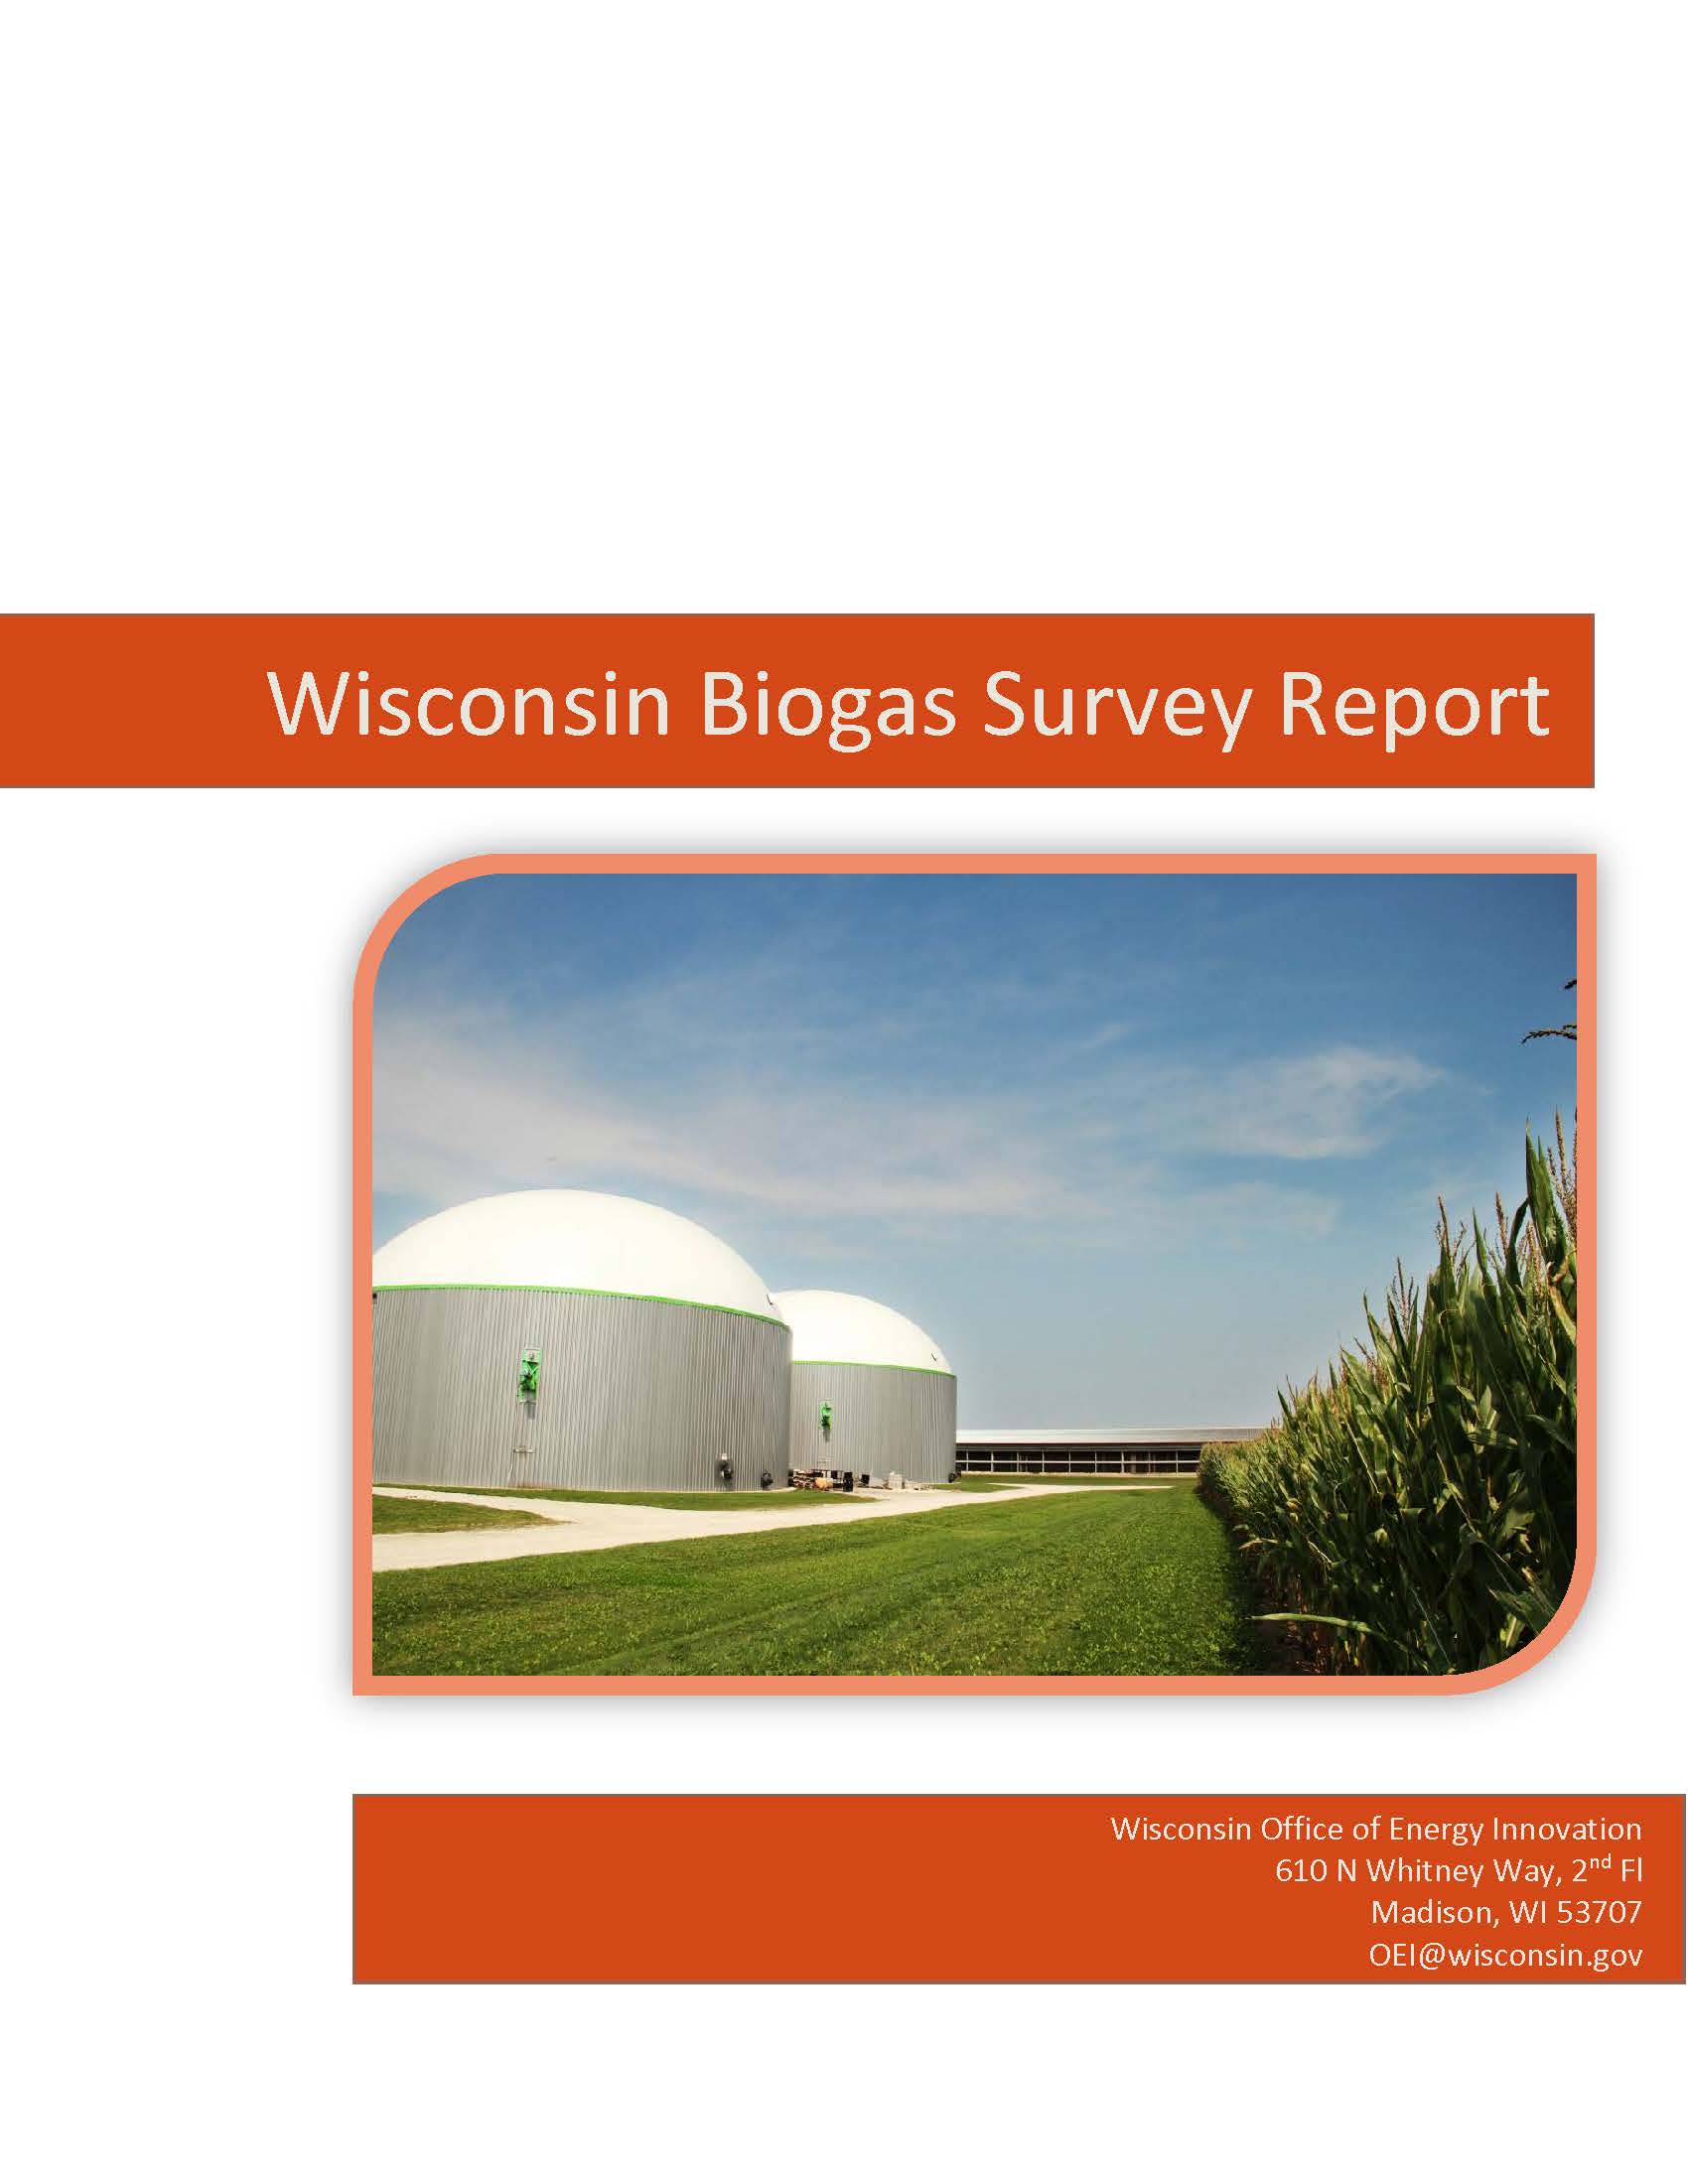 image of WI biogas survey 2016 report cover